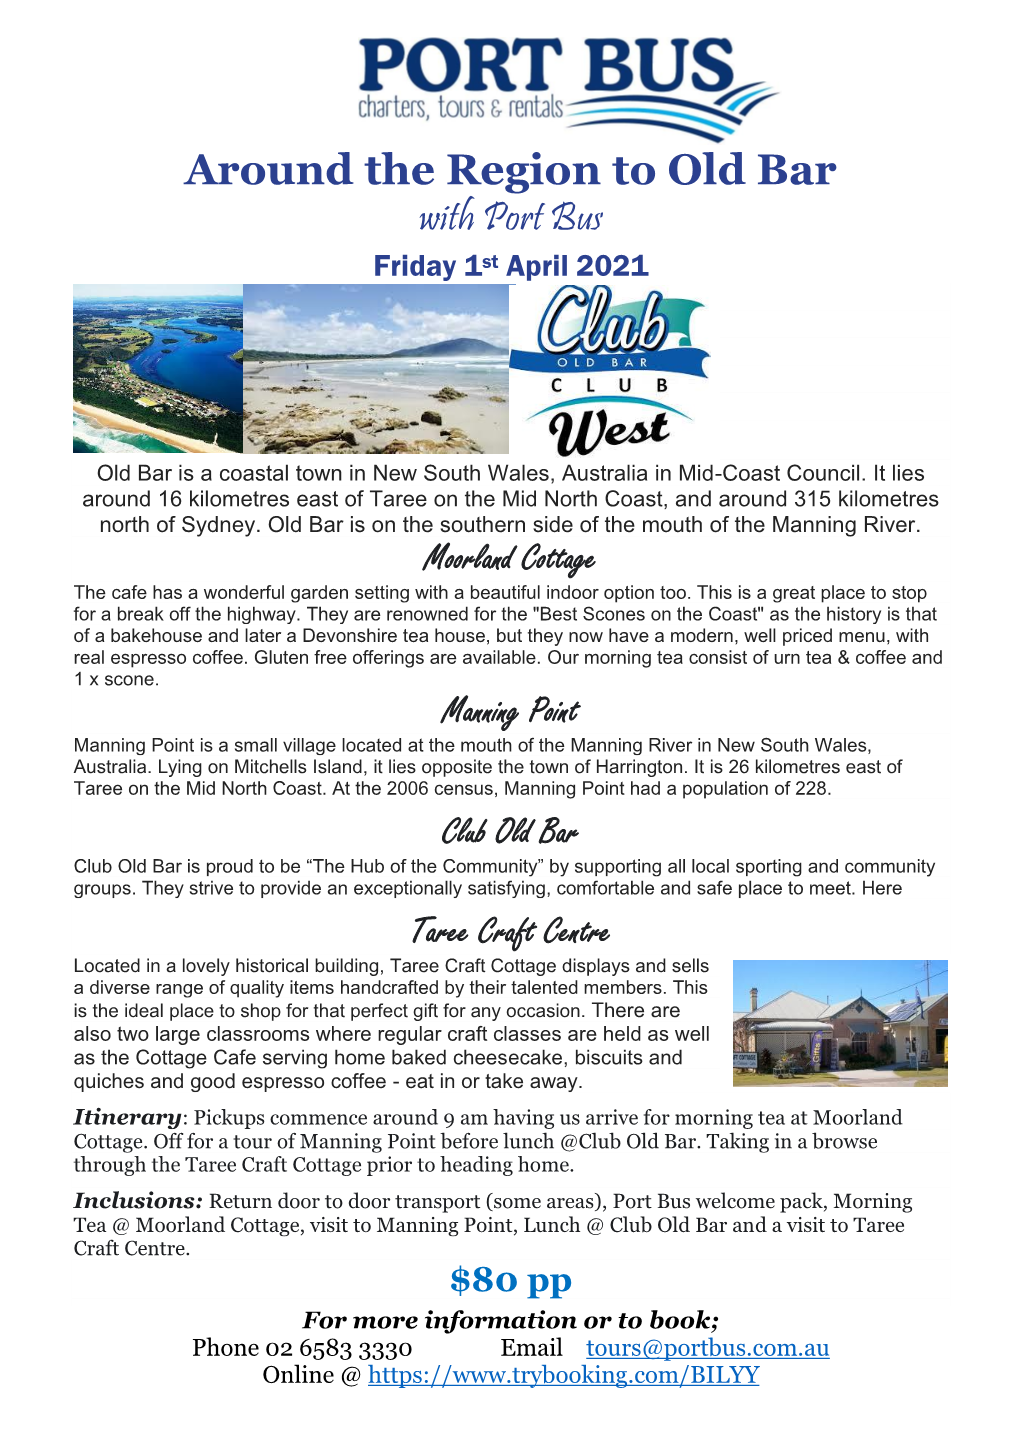 Around the Region to Old Bar with Port Bus Friday 1St April 2021